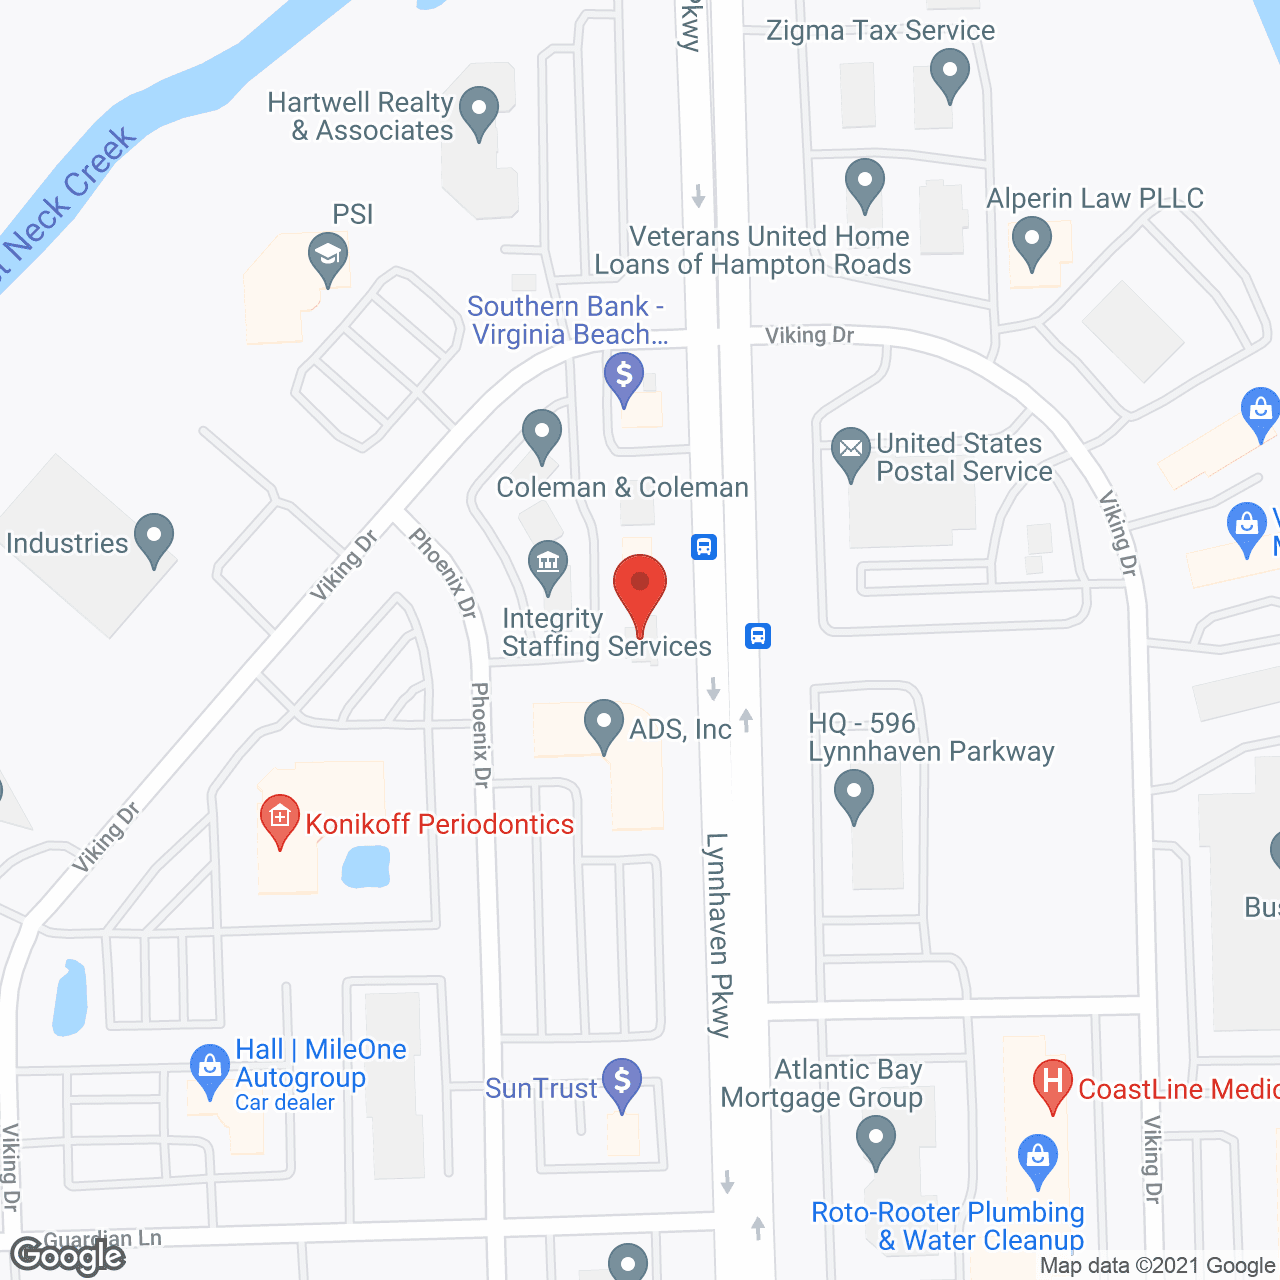 Quality Hands & Hearts Home in google map